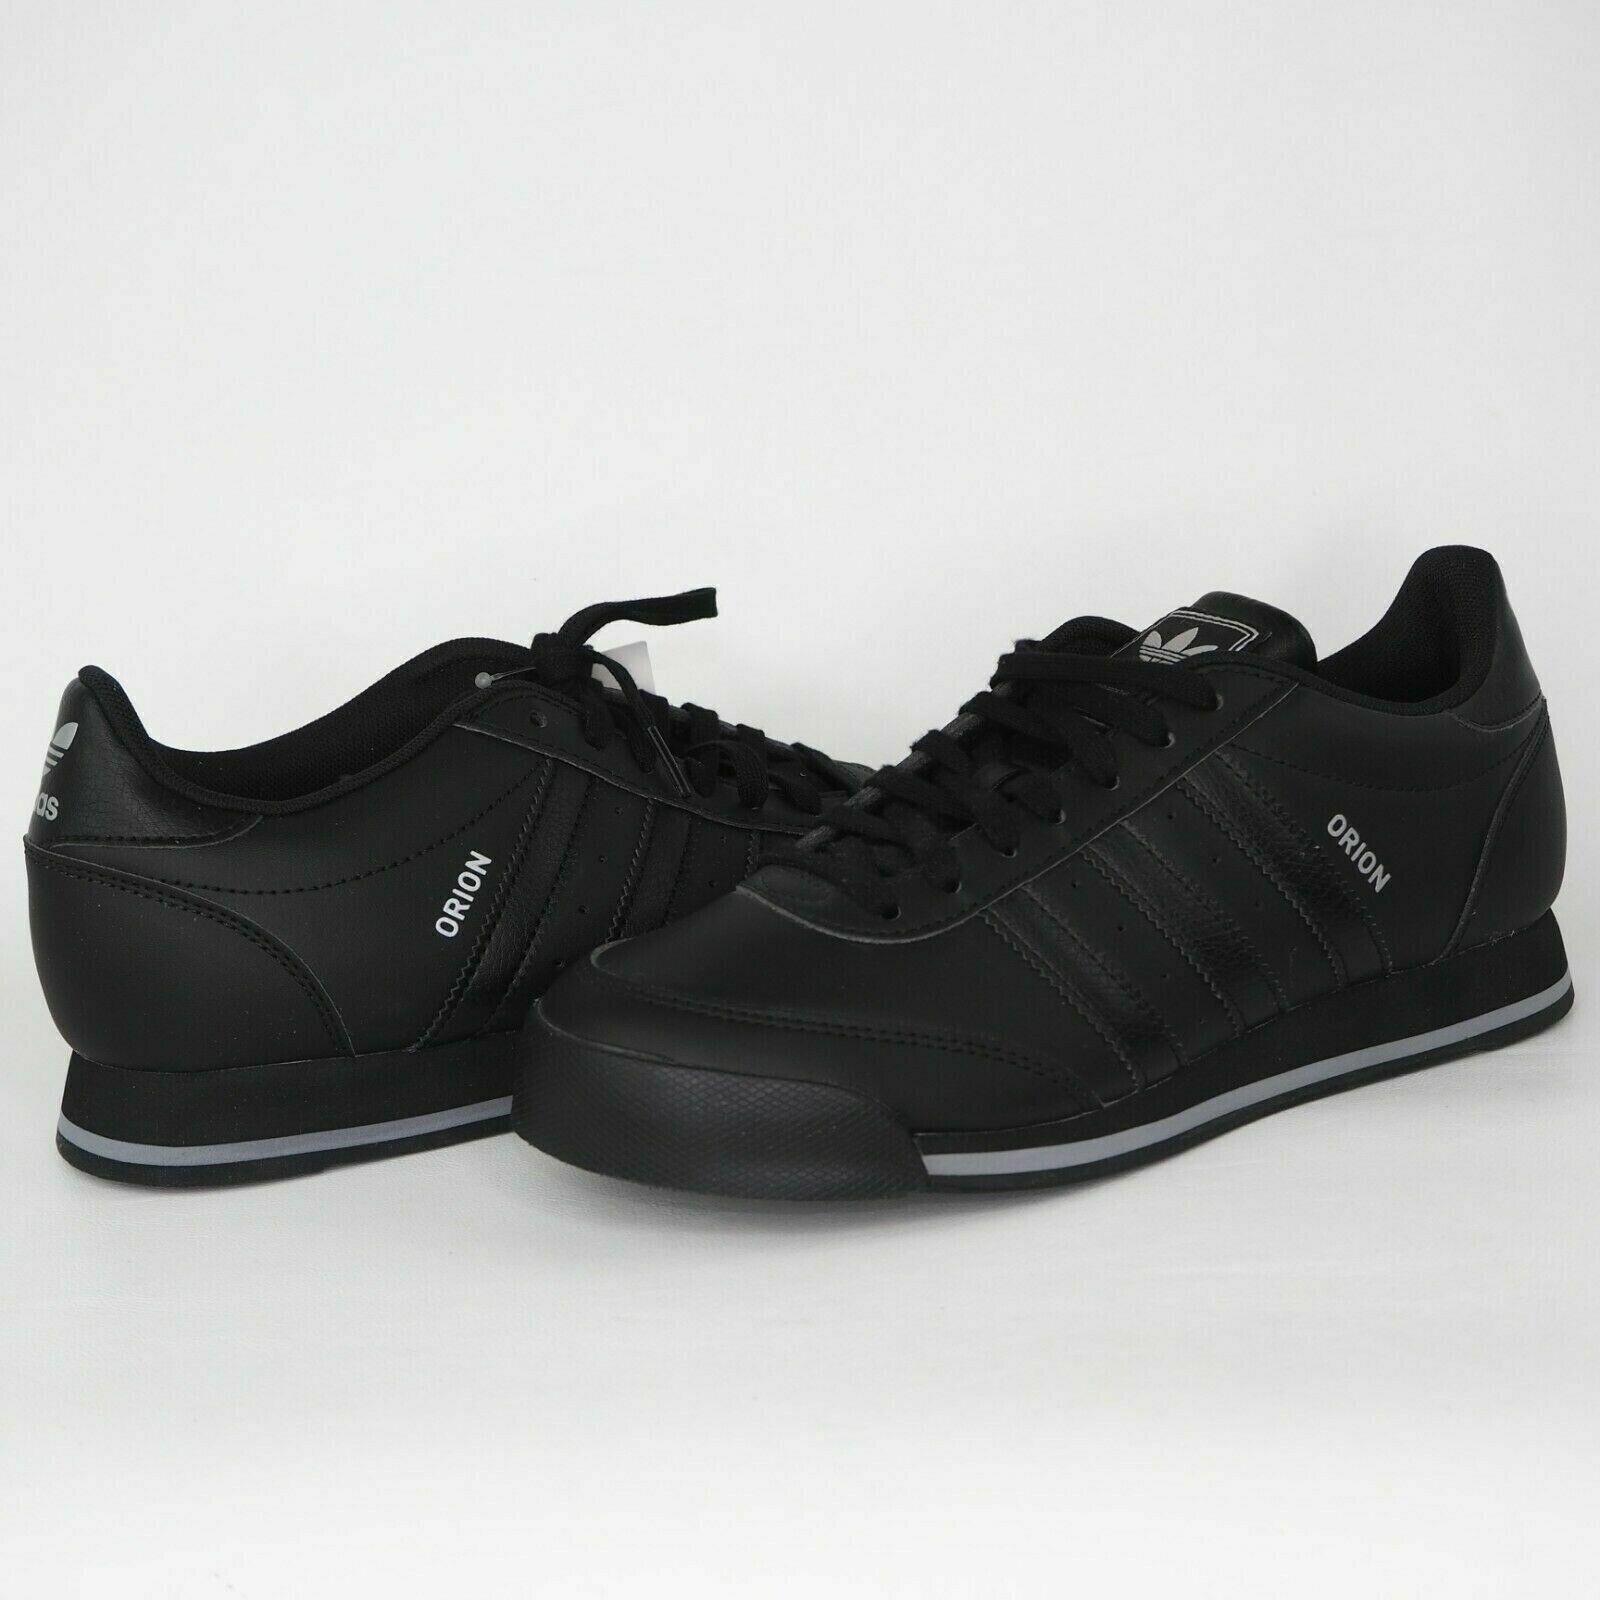 Adidas shoes Orion - Black 5